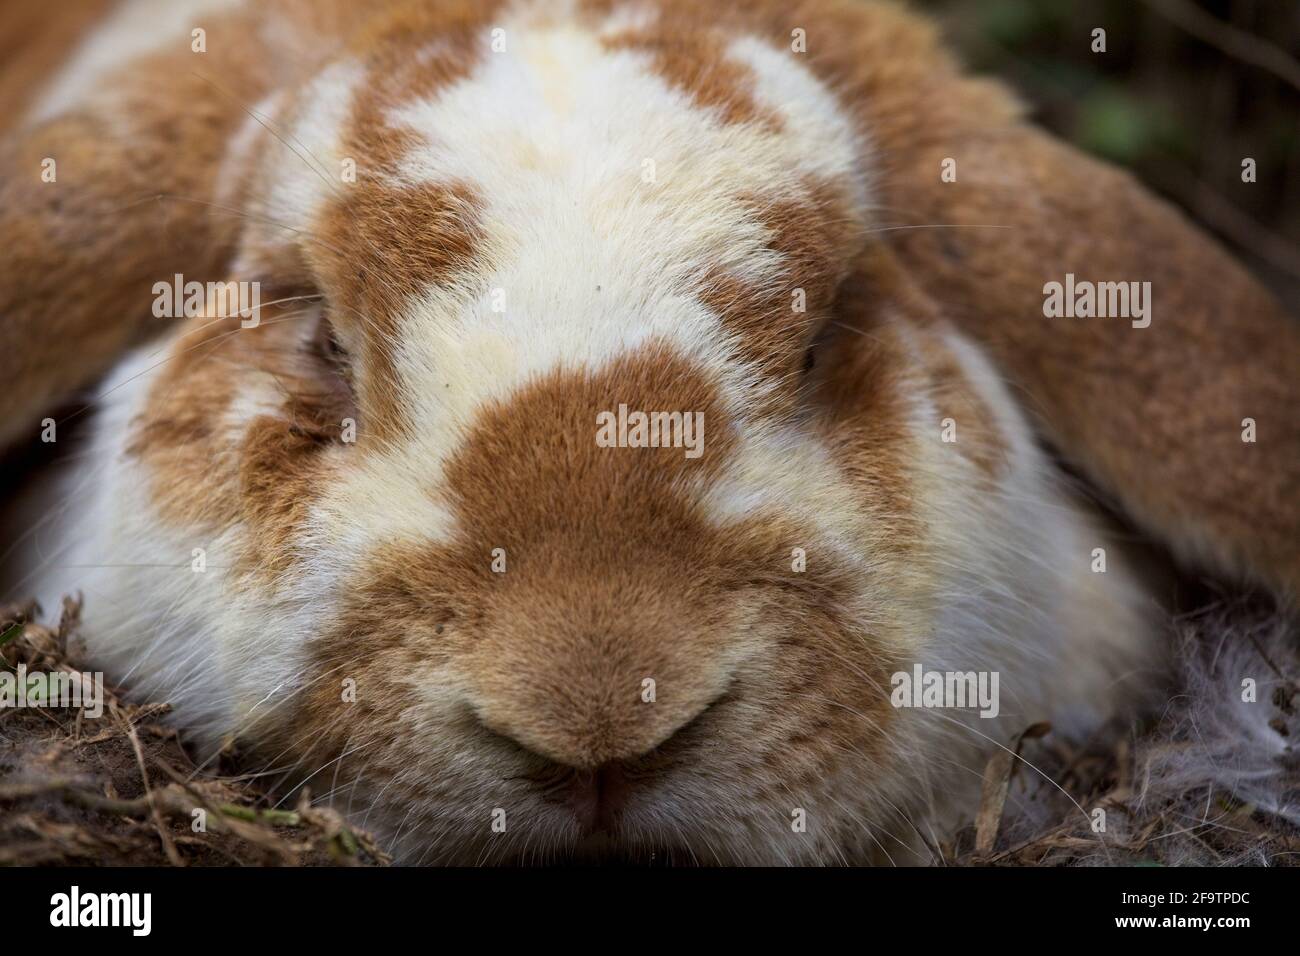 Closeup face portrait of Lop Rabbit (Oryctolagus cuniculus) with long ears, Guatemala. Stock Photo